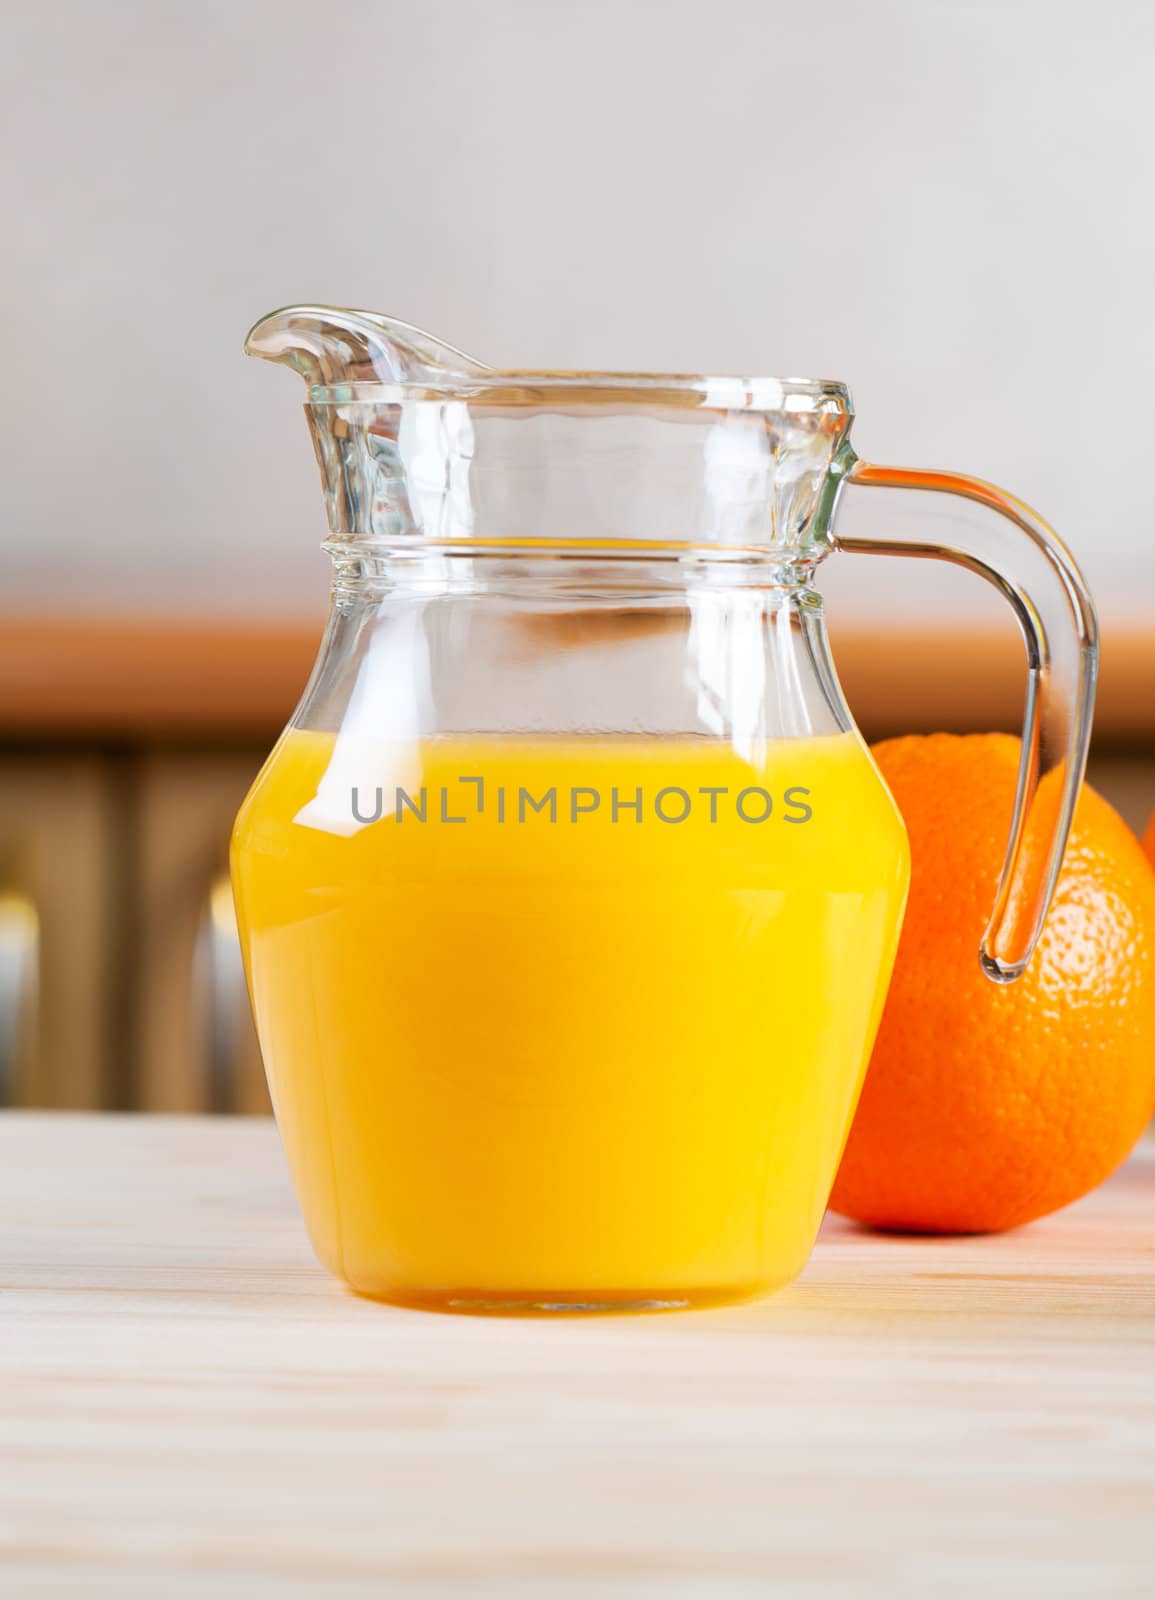 Juice in glass jar and orange on kitchen table.